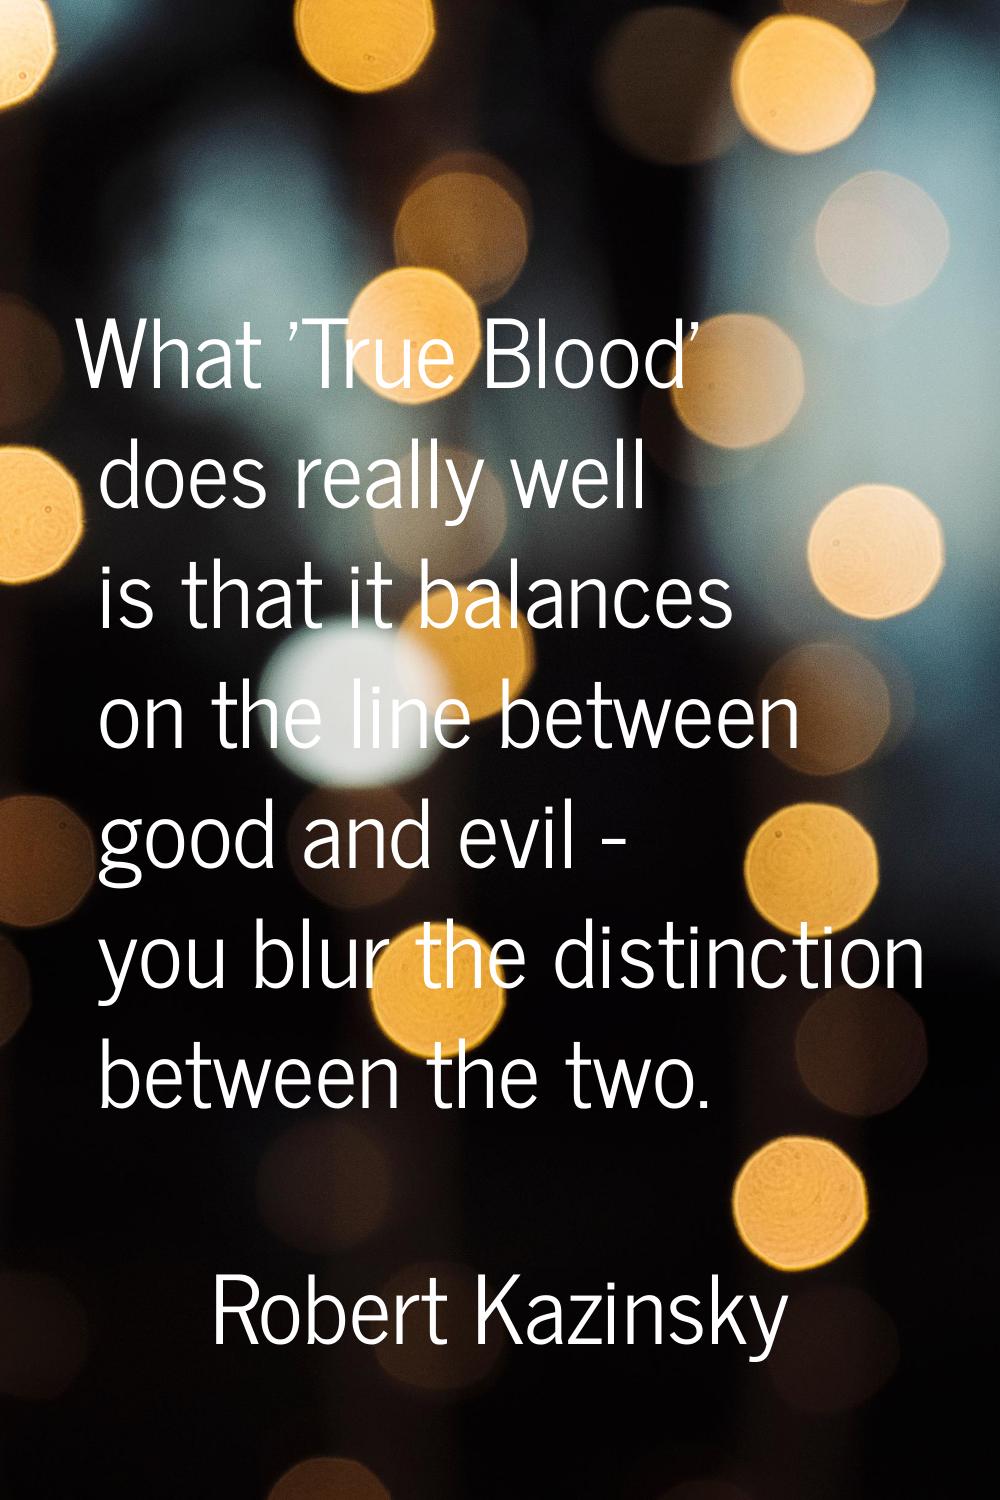 What 'True Blood' does really well is that it balances on the line between good and evil - you blur